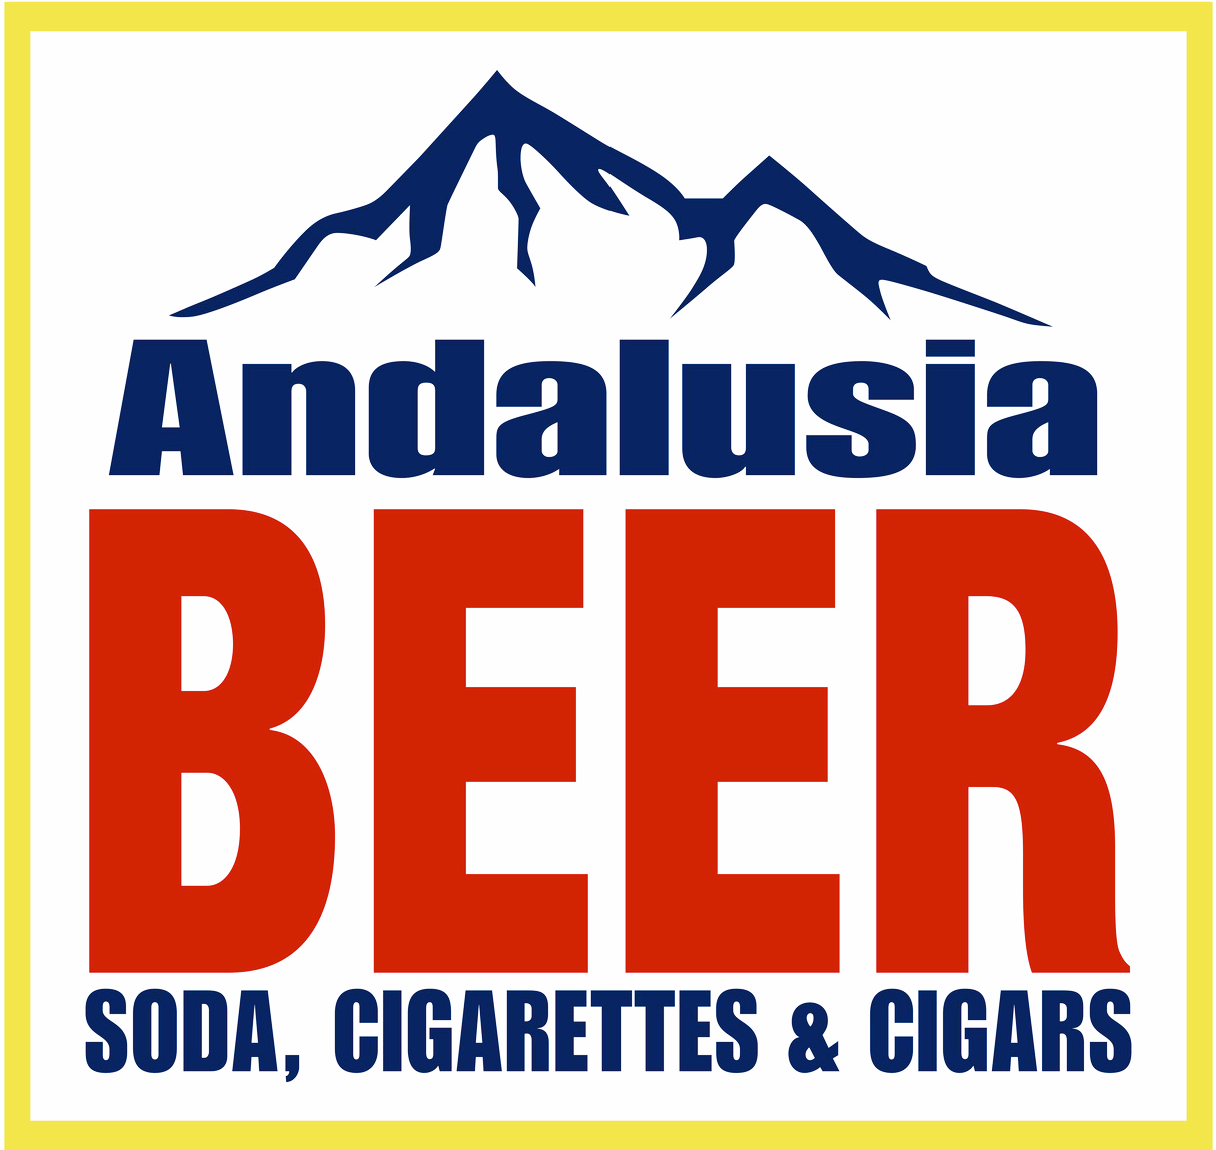 Andalusia beer, soda, cigarettes and cigars.